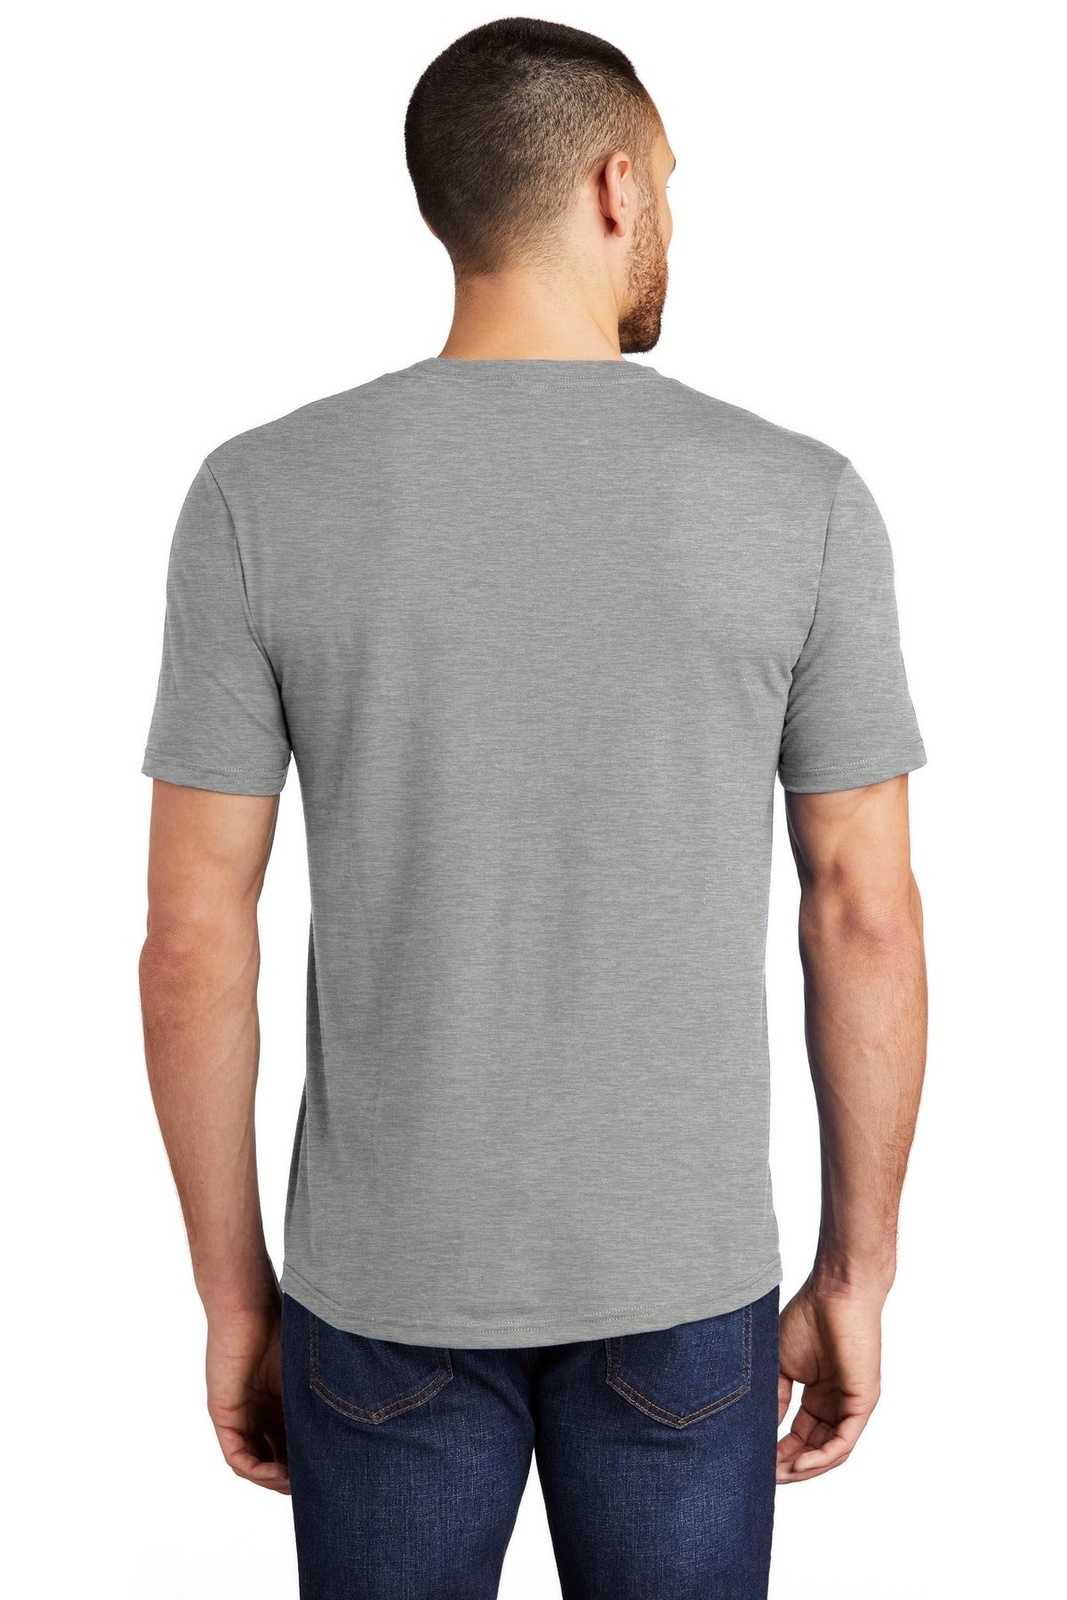 District DM130 Perfect Tri Tee - Heathered Gray - HIT a Double - 2